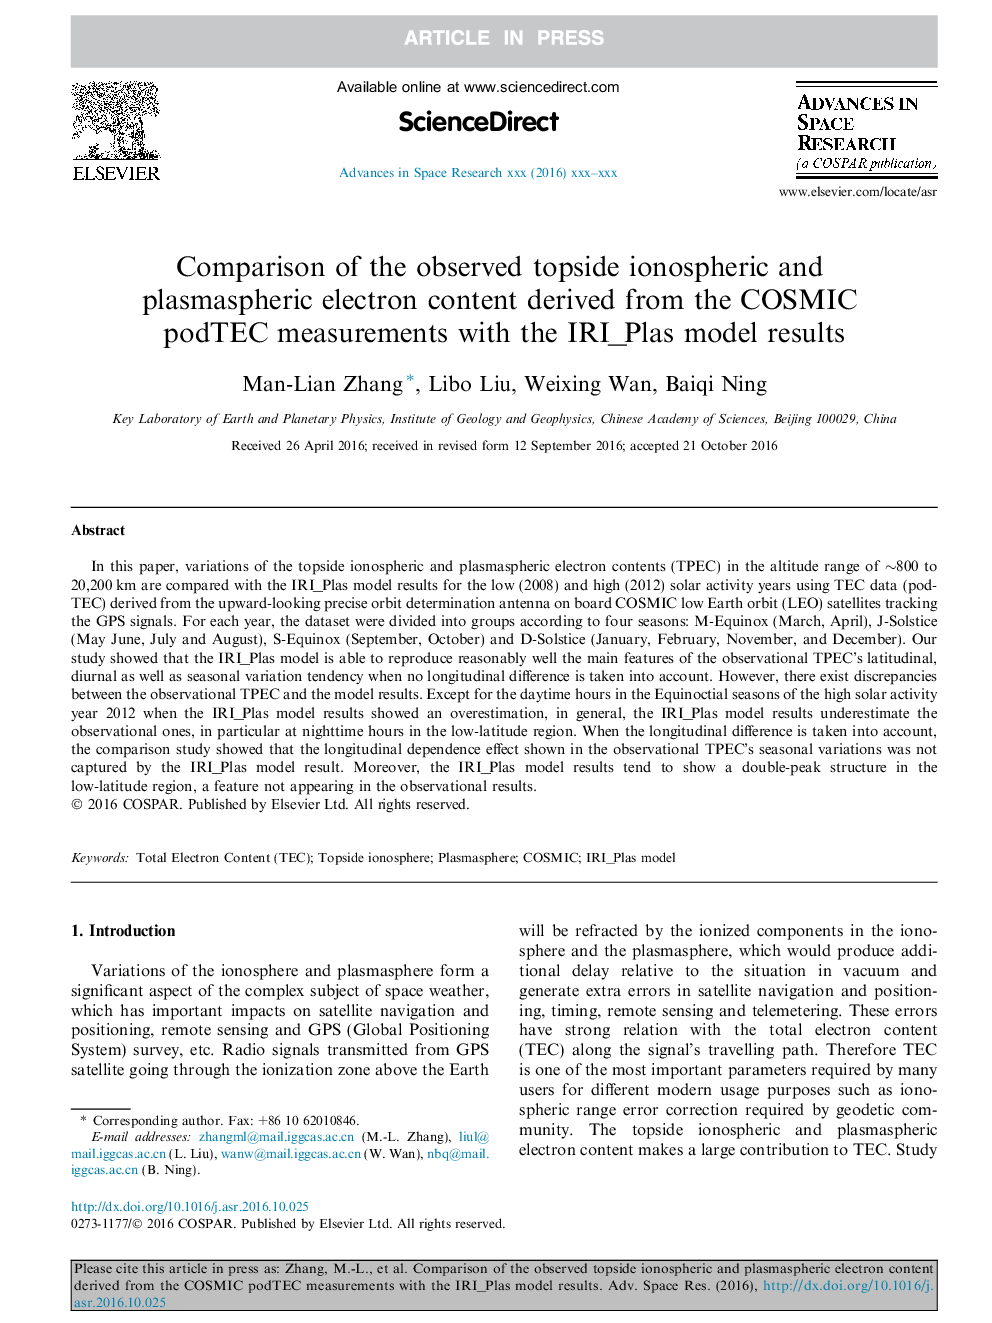 Comparison of the observed topside ionospheric and plasmaspheric electron content derived from the COSMIC podTEC measurements with the IRI_Plas model results